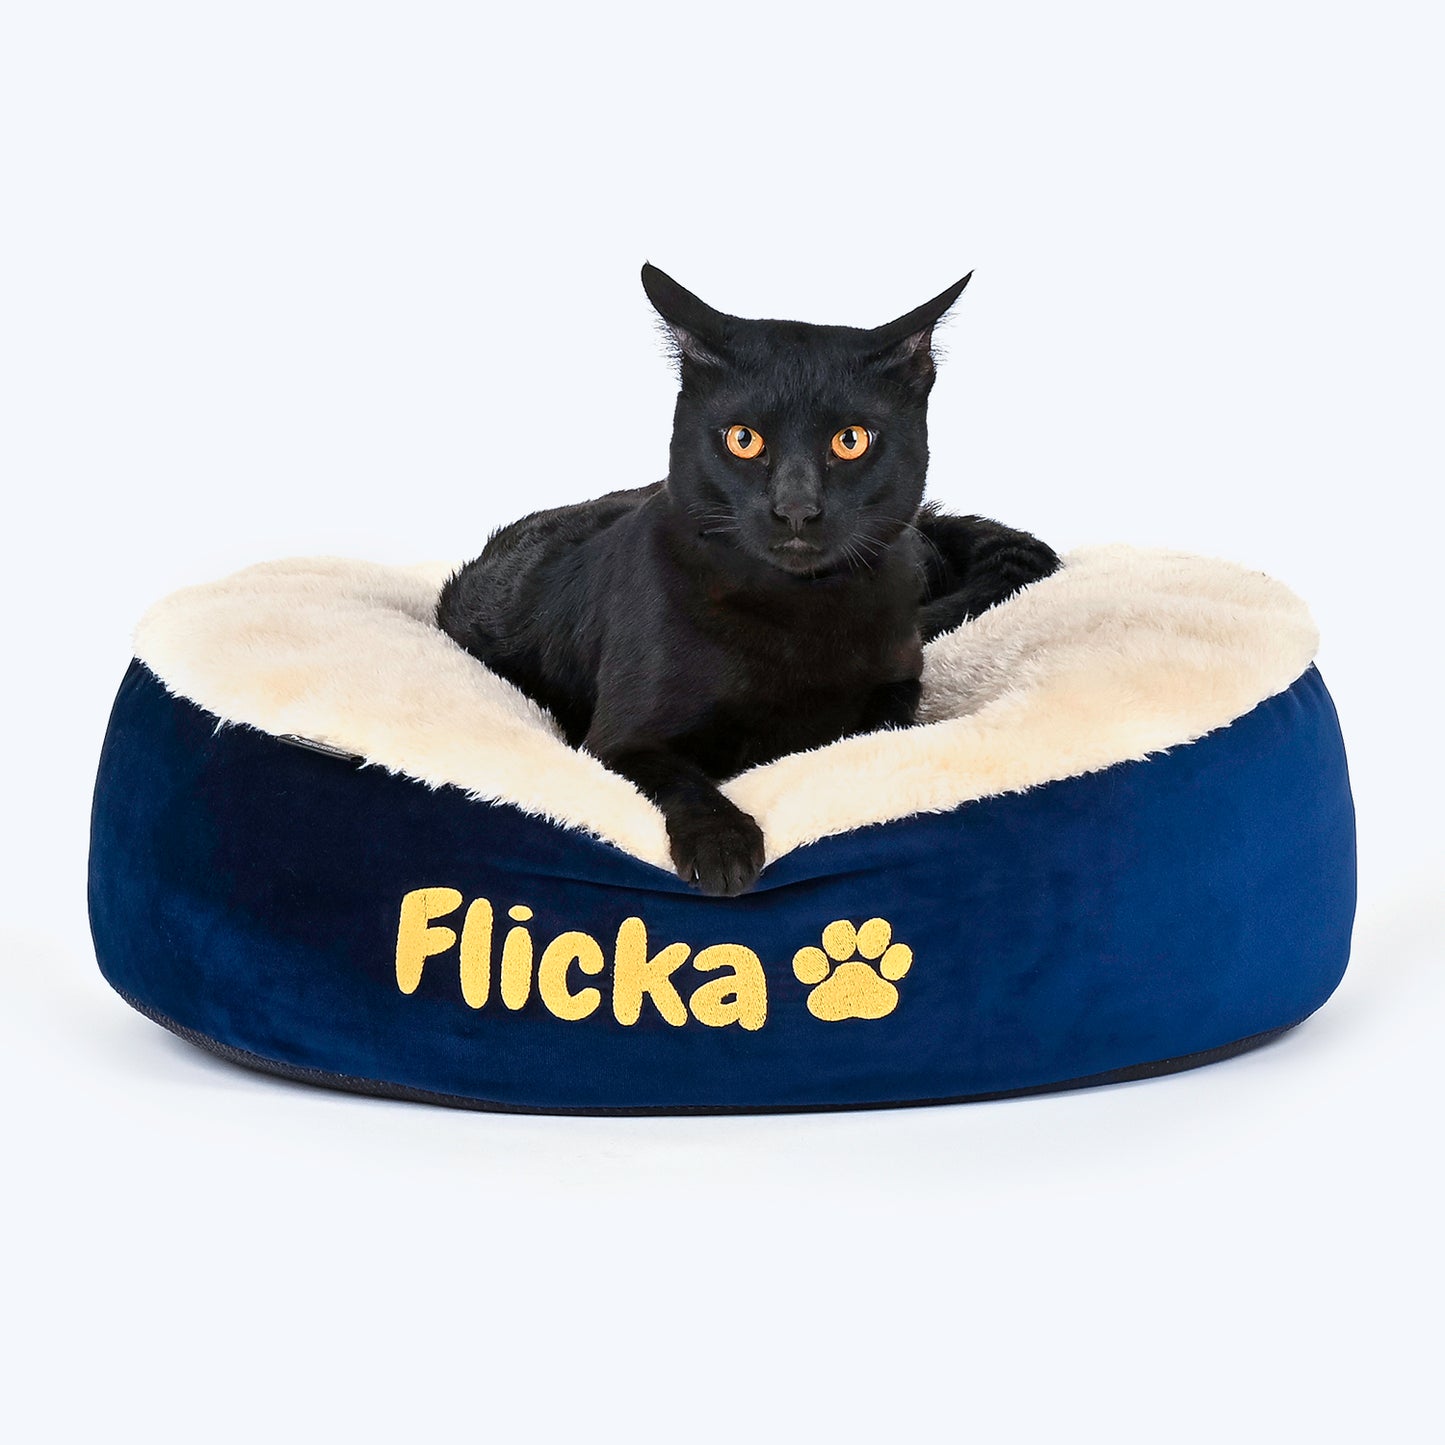 HUFT Personalised Cloudy Cat Bed - Heads Up For Tails